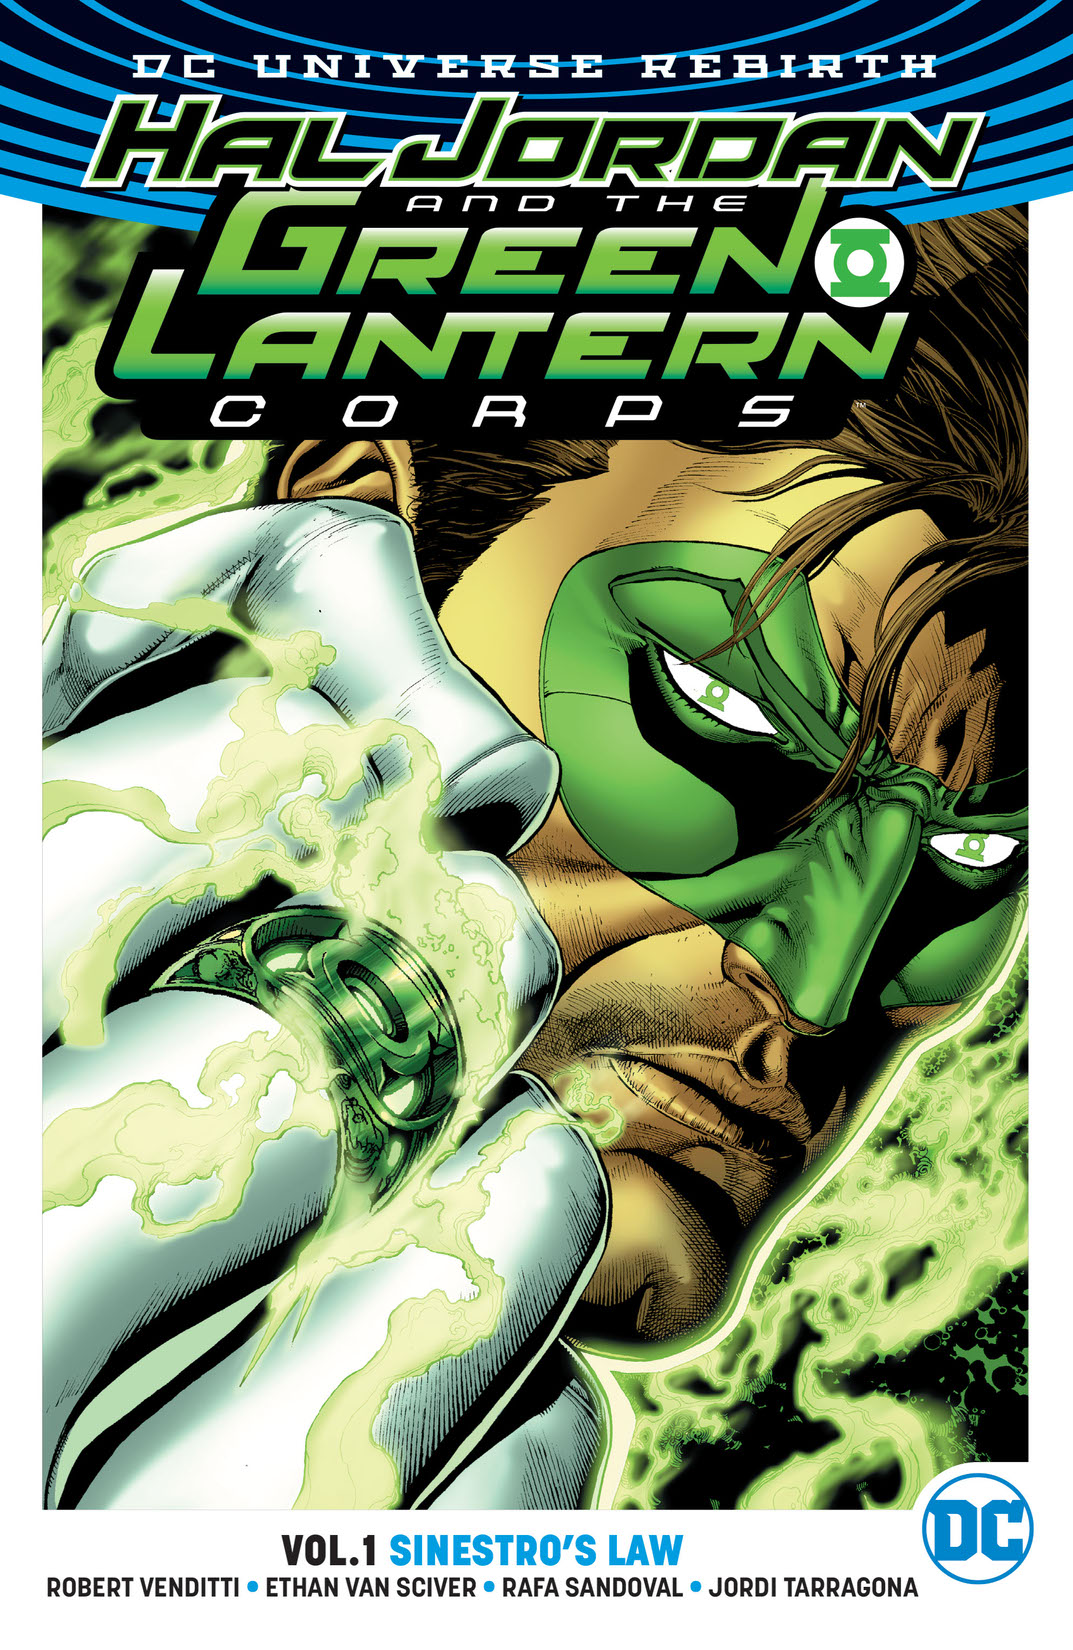 Hal Jordan and the Green Lantern Corps Vol. 1: Sinestro's Law preview images